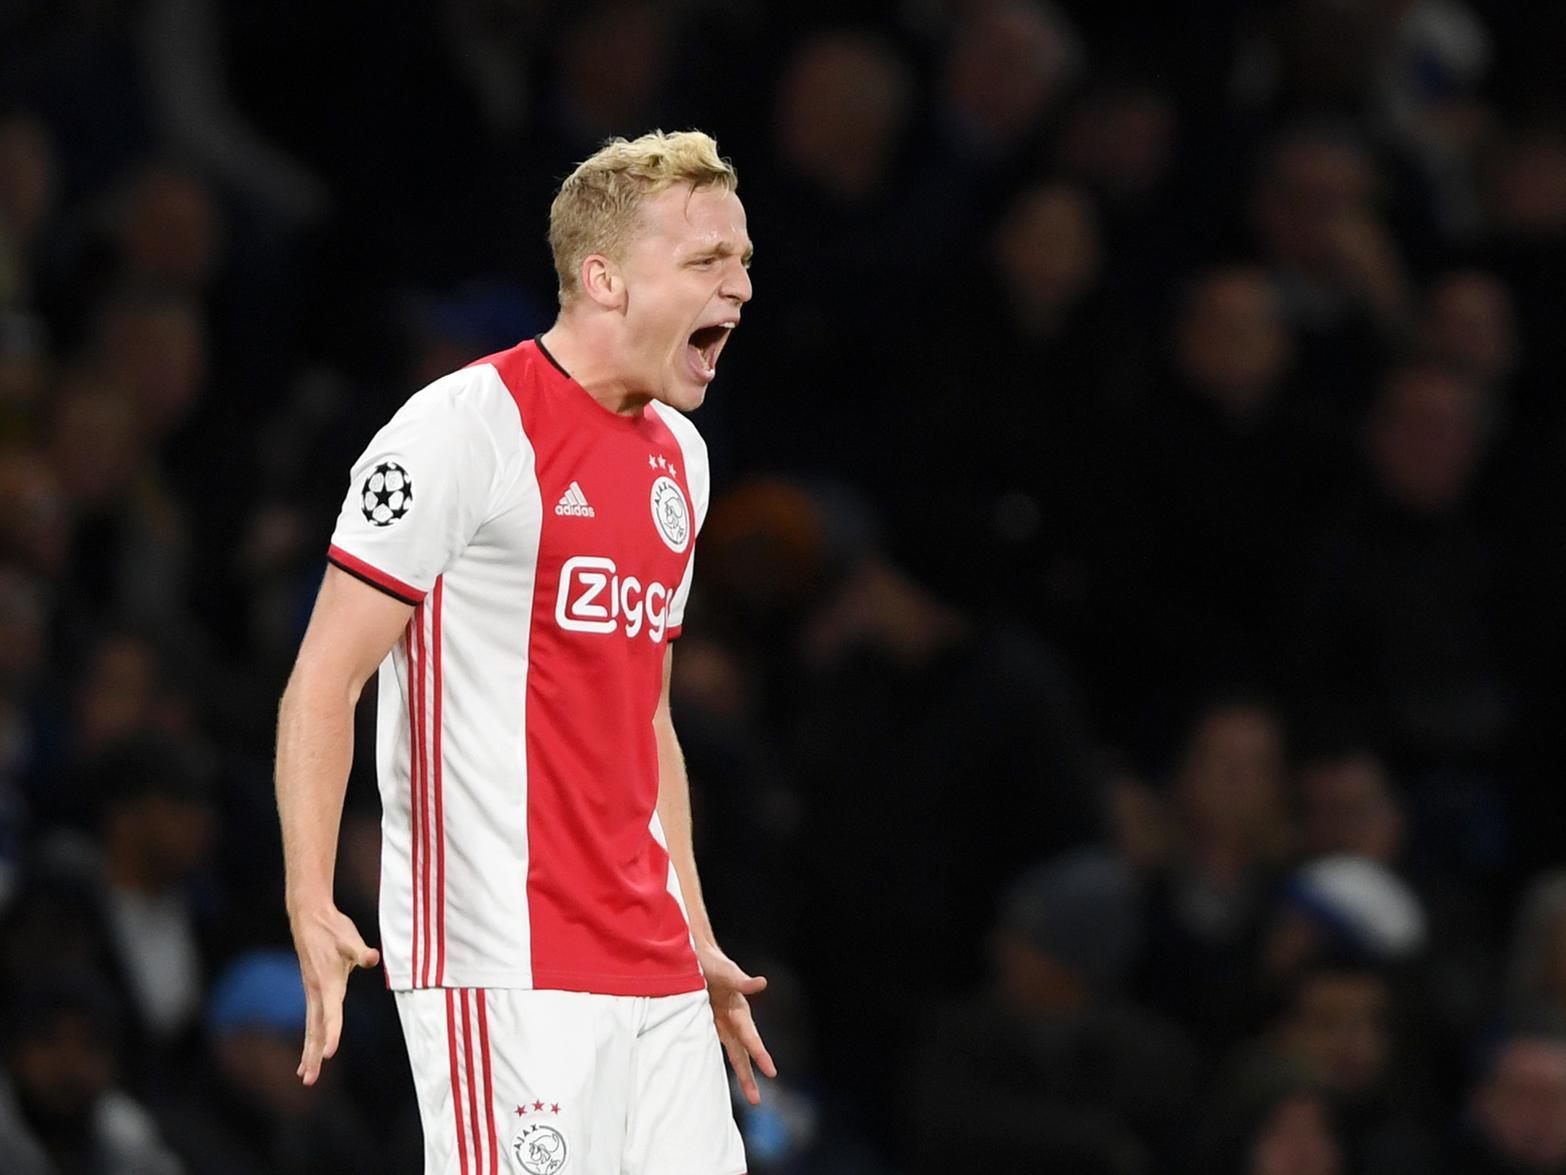 Manchester United have lost out to Spanish giants Real Madrid in the race to sign 22-year-old Ajax and Netherlands midfielder Donny van de Beek. (Daily Star Sunday)